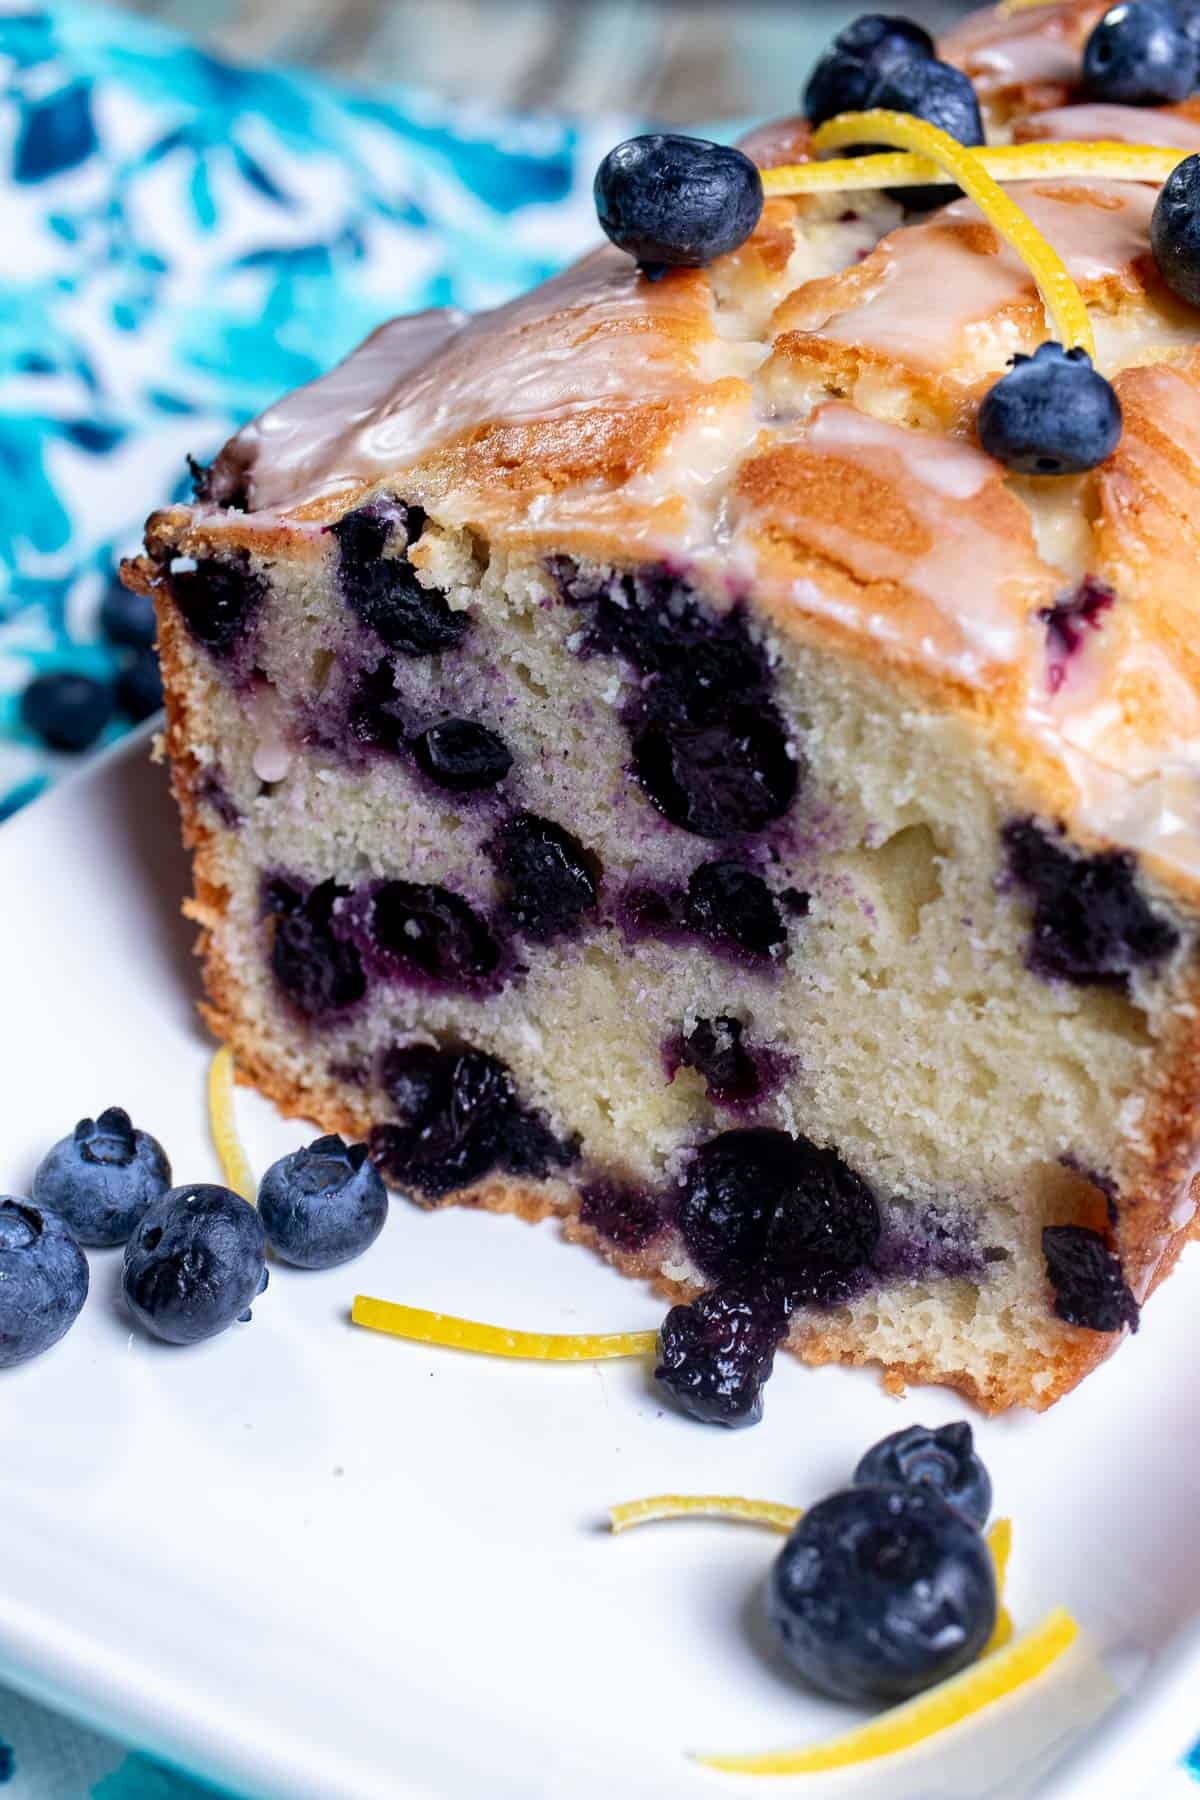 Close up view of a sliced, glazed, lemon blueberry pound cake on a white plate with blueberries and lemon zest around it.